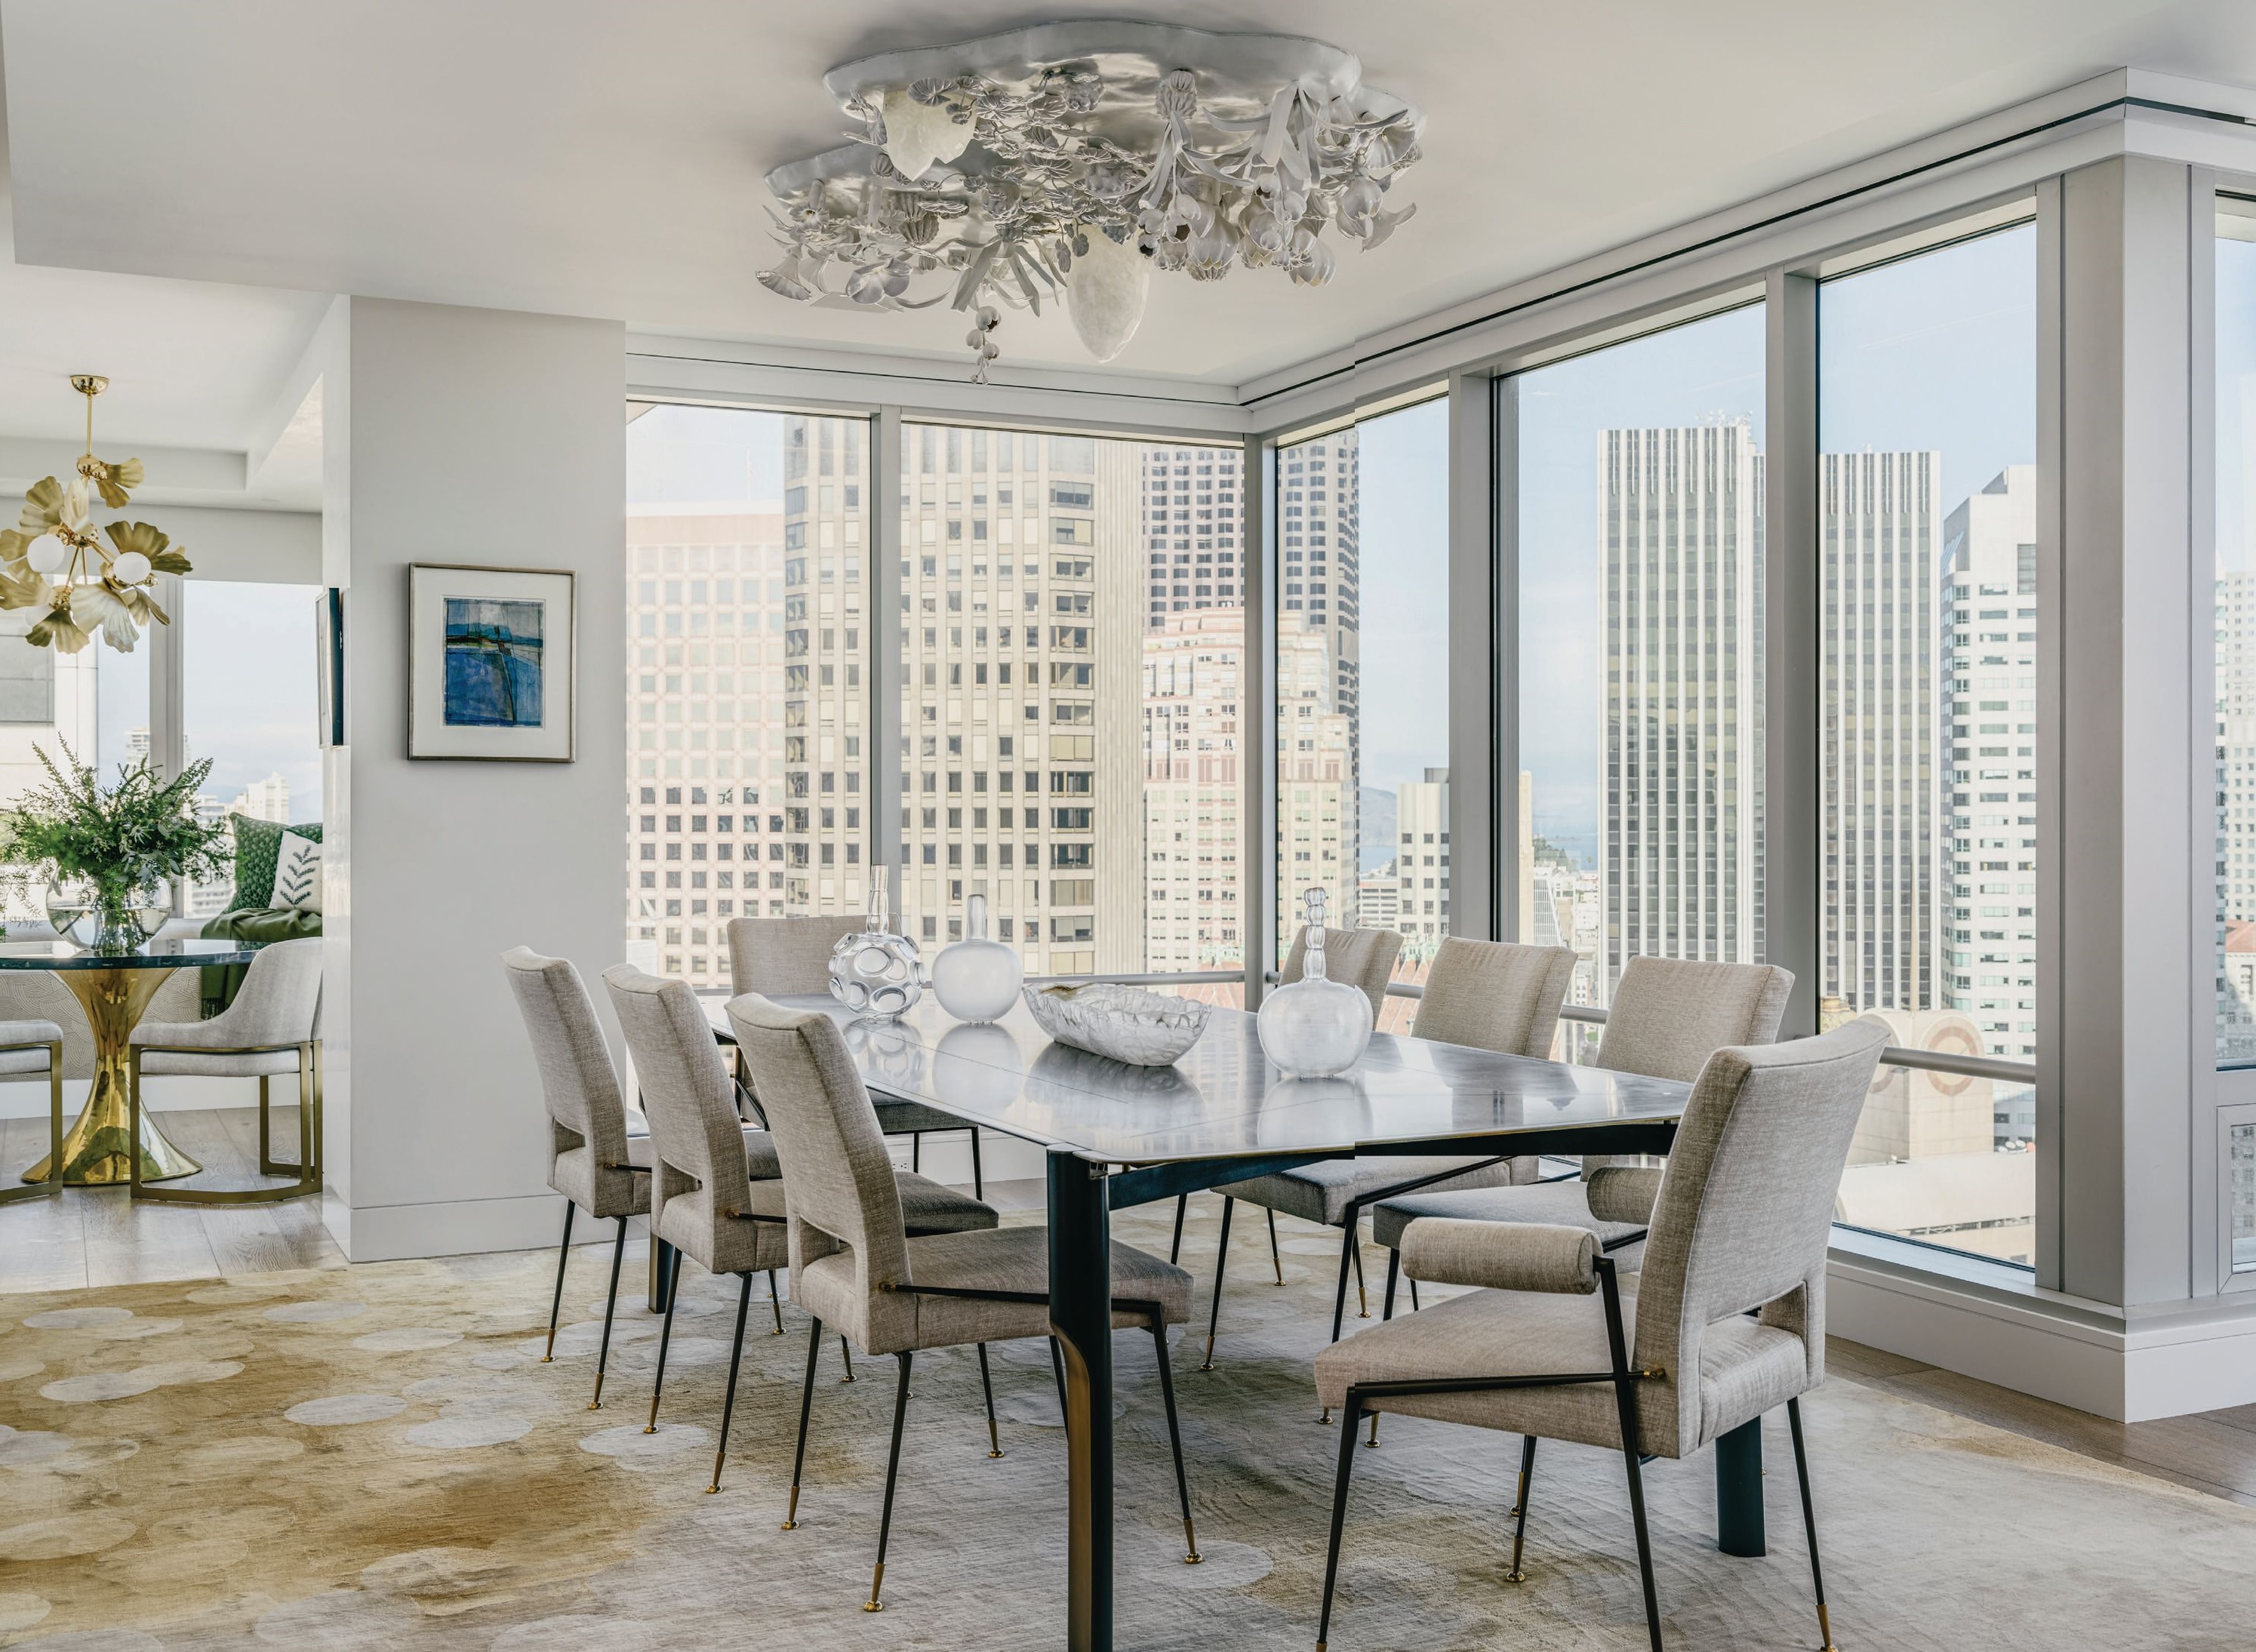 David Wiseman Cloud Garden Canopy lighting sets the stage for a gorgeous dining room with exceptional views of the city. PHOTOGRAPHED BY CHRISTOPHER STARK